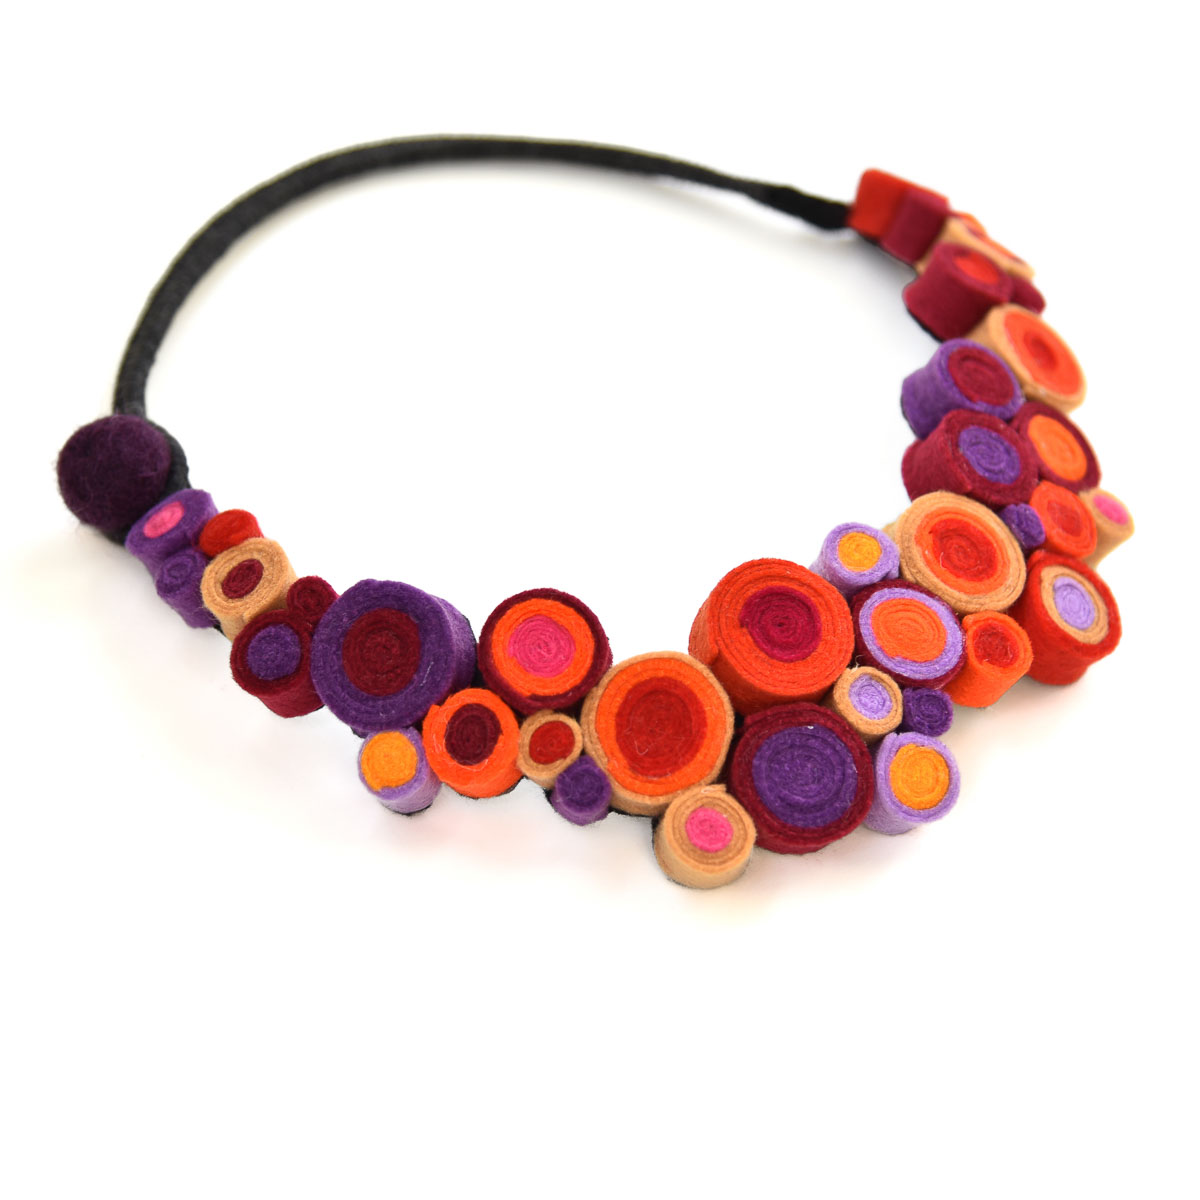 Blooming jewelry includes statement collar necklaces inspired by colorful flower gardens. The jewelry is made with felt beads and looks like a blooming garden. Designed and made by Katerina Glinou.